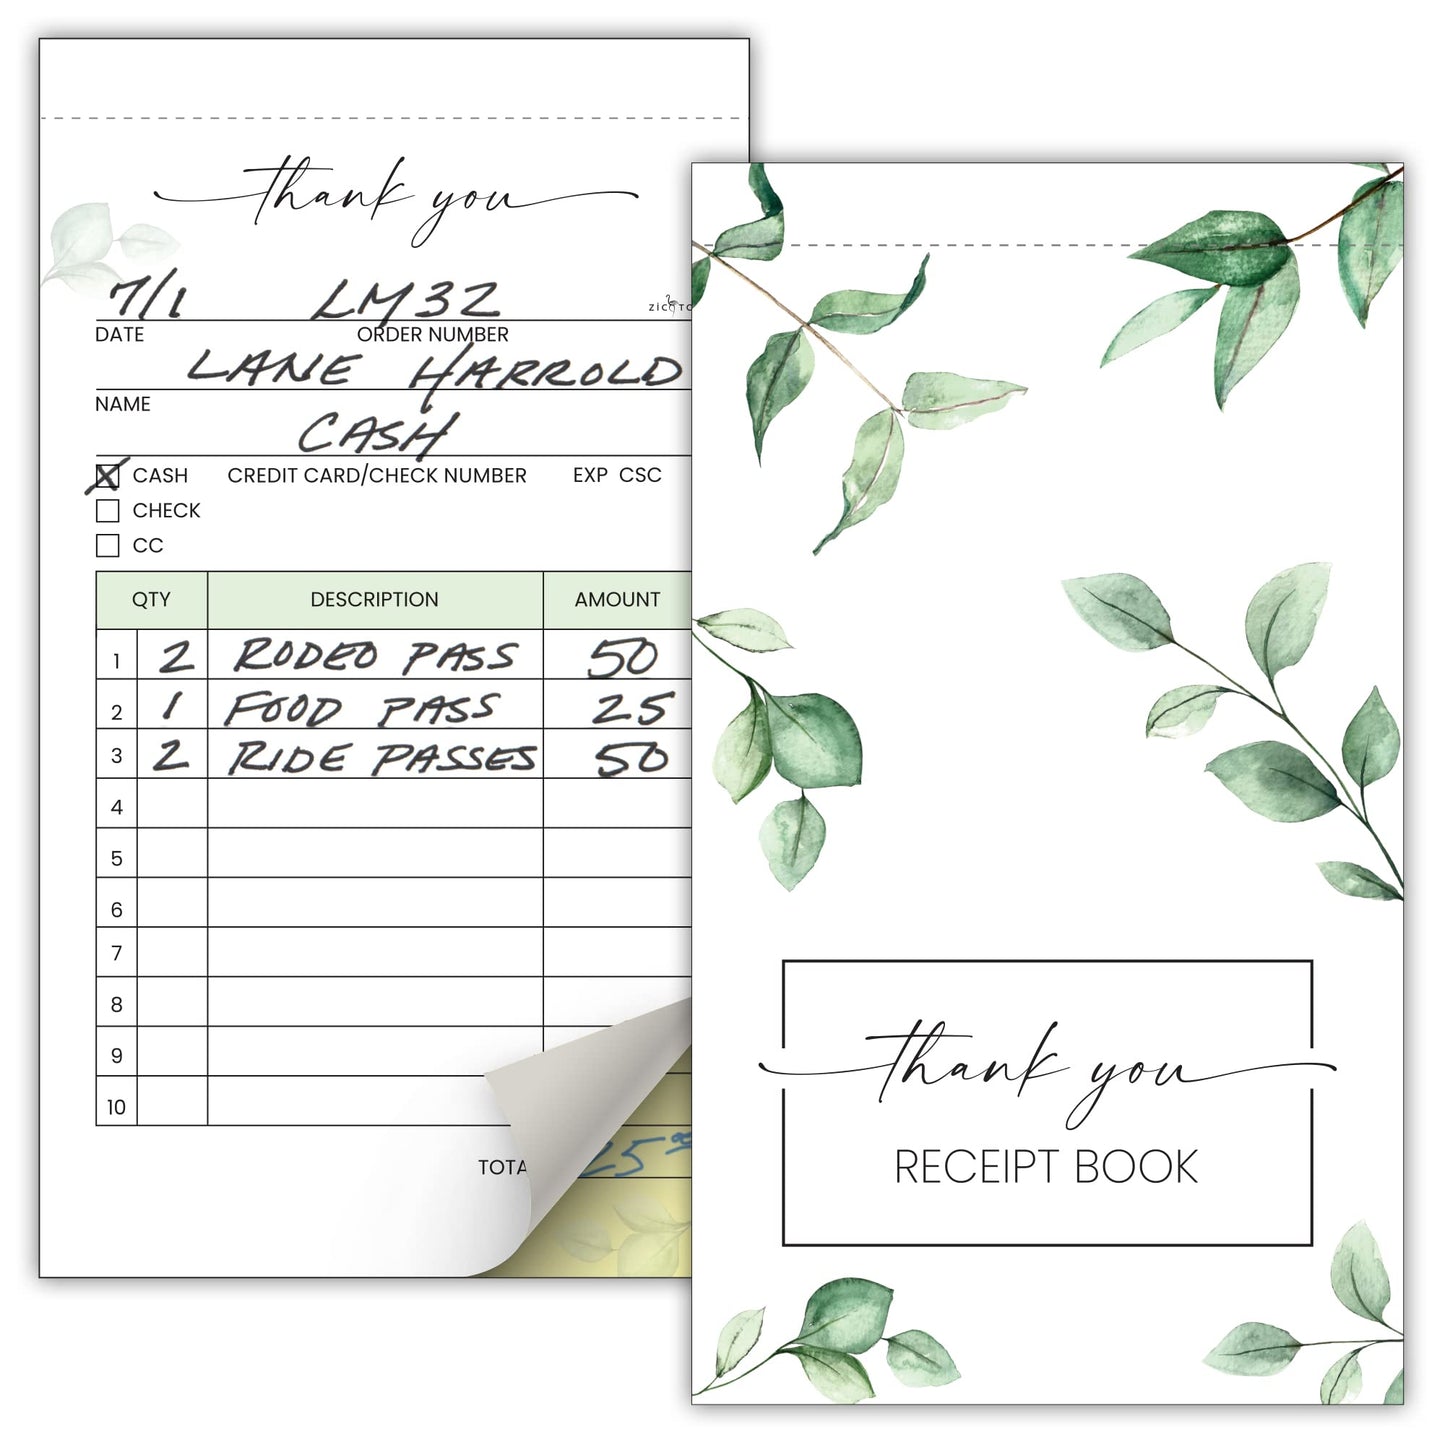 Simplified Thank You Receipt Book for Small Businesses - Aesthetic and Easy to Use Receipt Pad - The Perfect Business Supplies That Helps You and your Happy Clients to Stay Organized